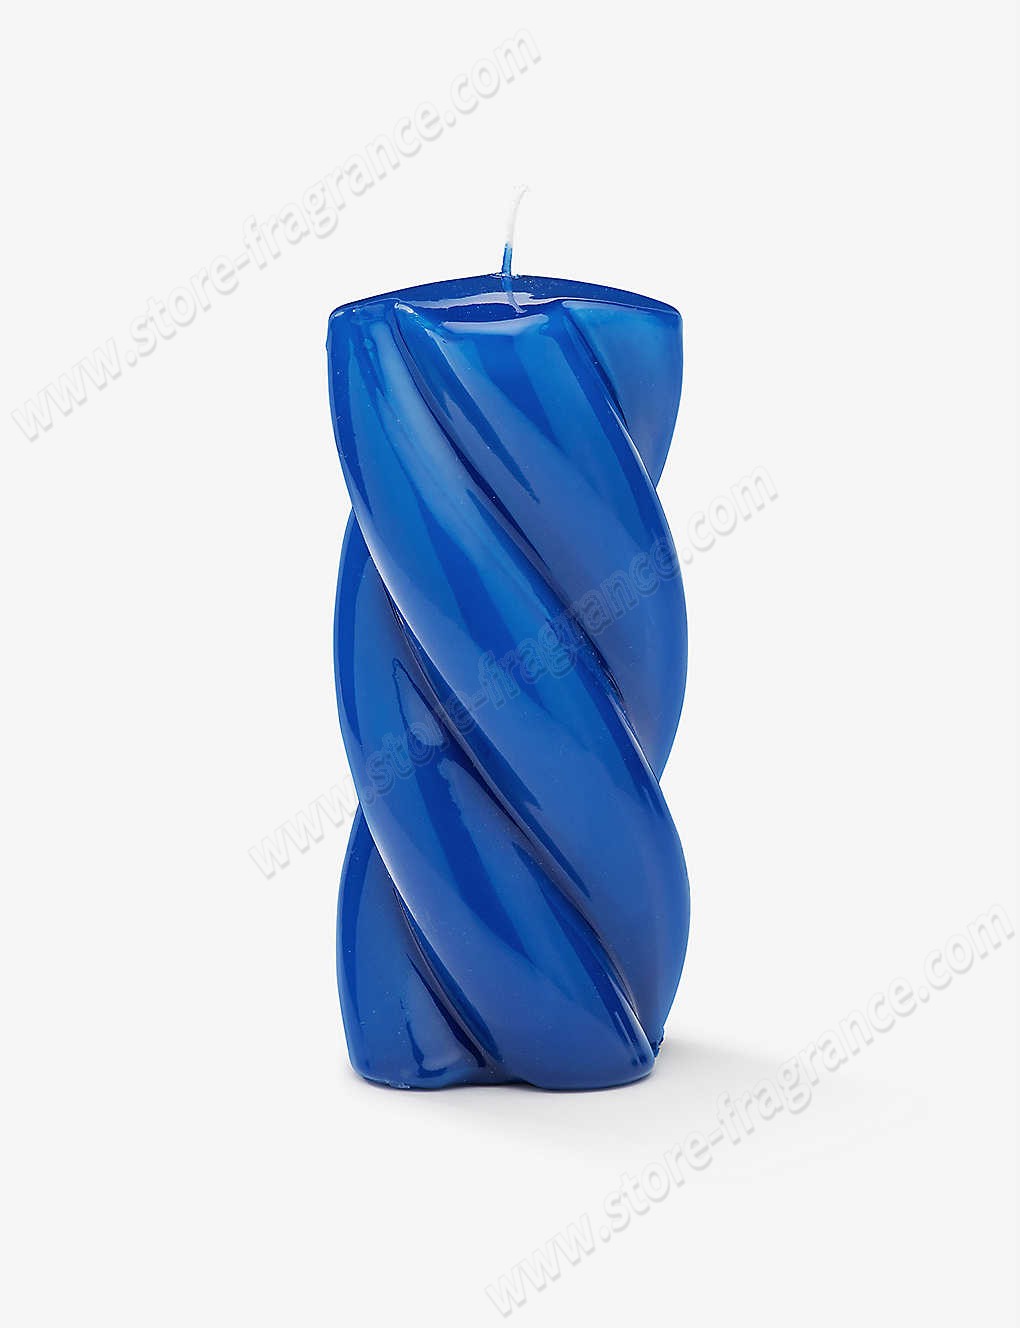 ANNA + NINA/Blunt Twisted paraffin candle 14cm Limit Offer - ANNA + NINA/Blunt Twisted paraffin candle 14cm Limit Offer